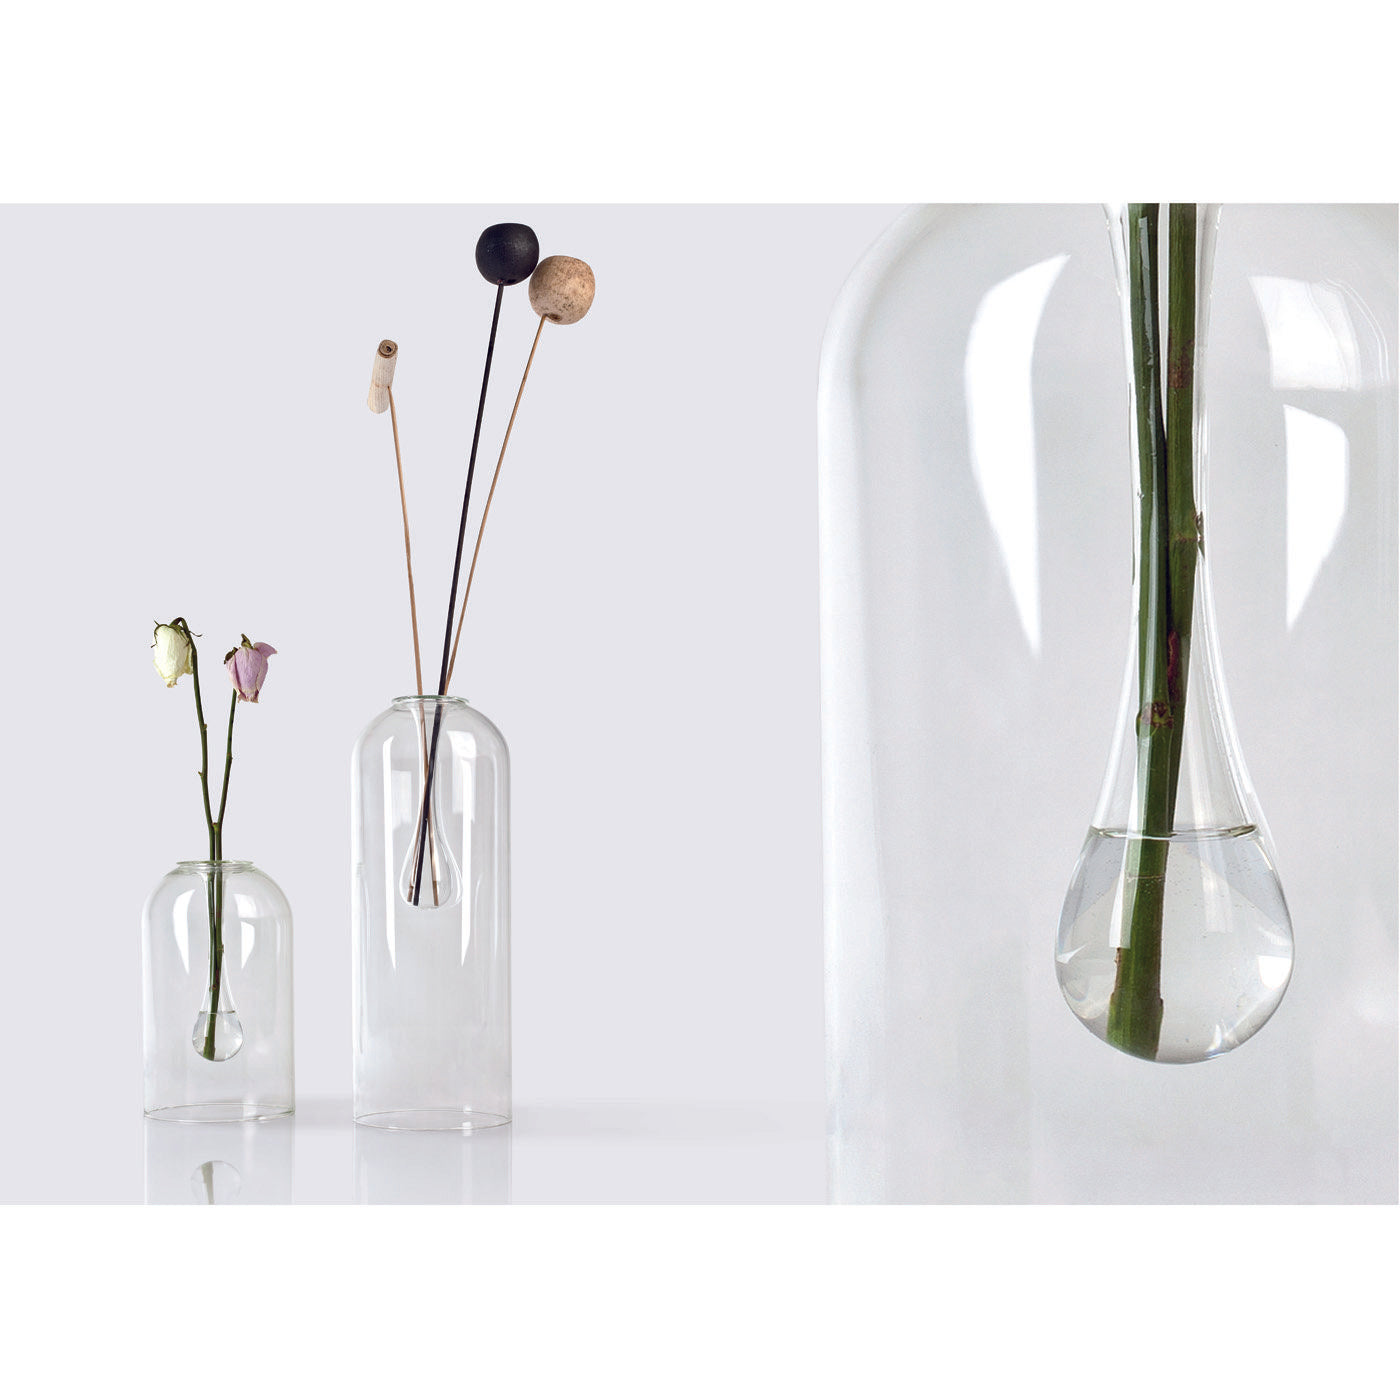 Tear Small Vase by Naessi Studio - Alternative view 1